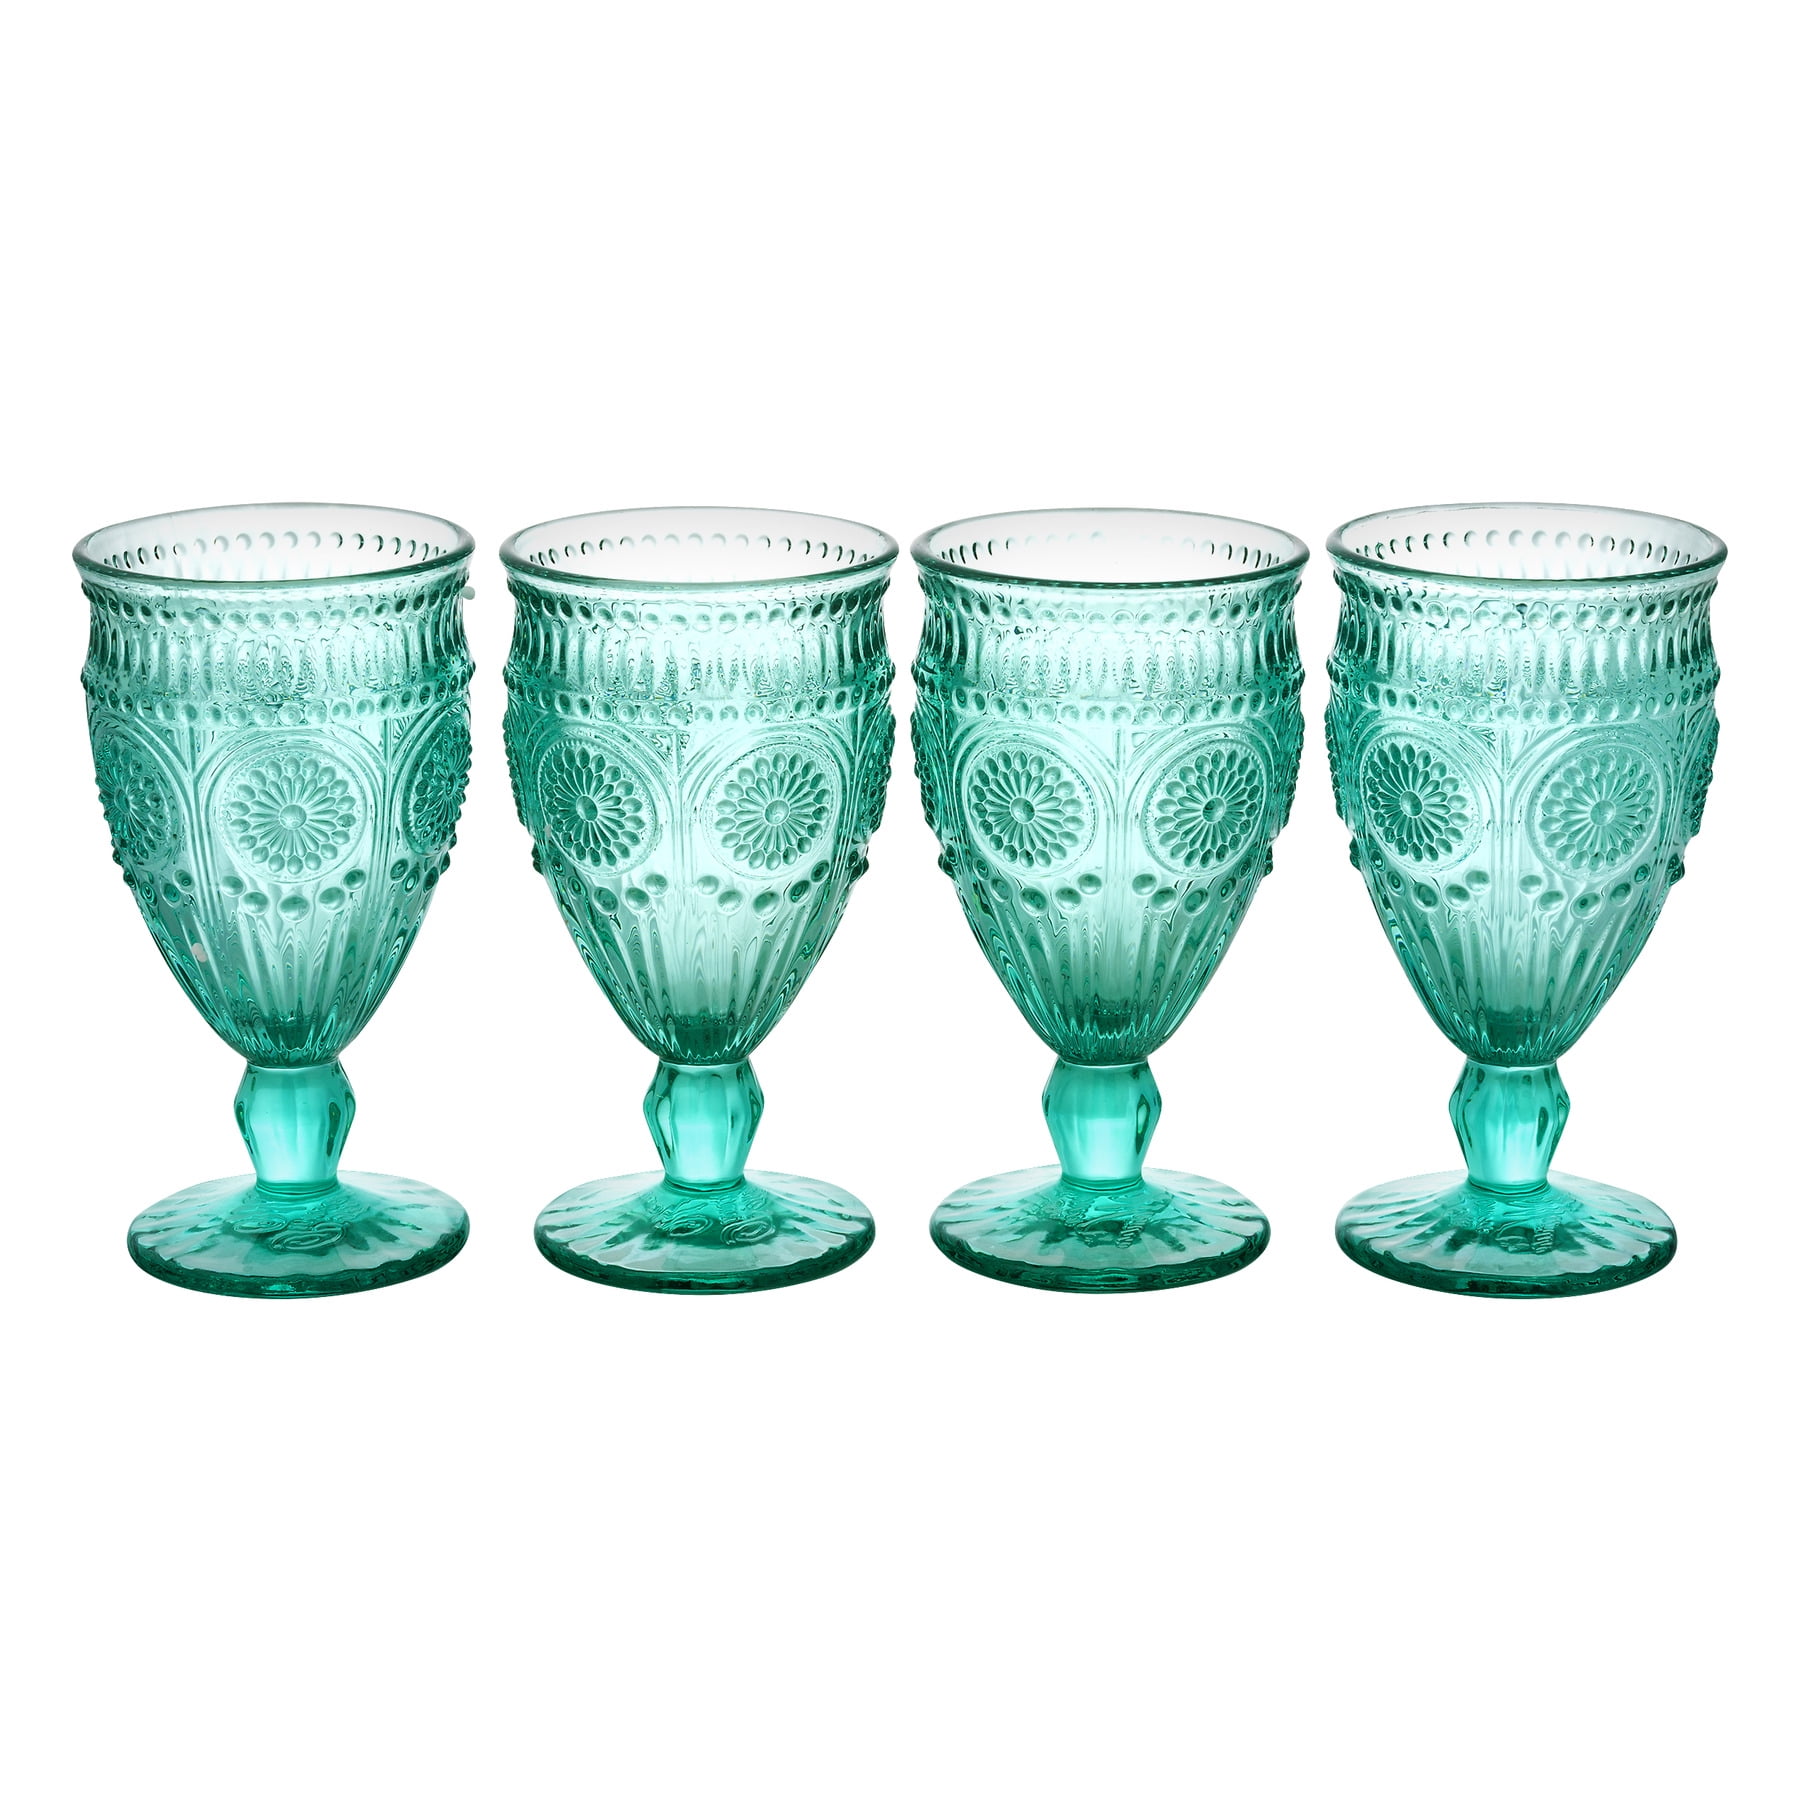 The Pioneer Woman Adeline 16oz Emboss Glass Tumbler Set of 4 for sale online Turquoise 